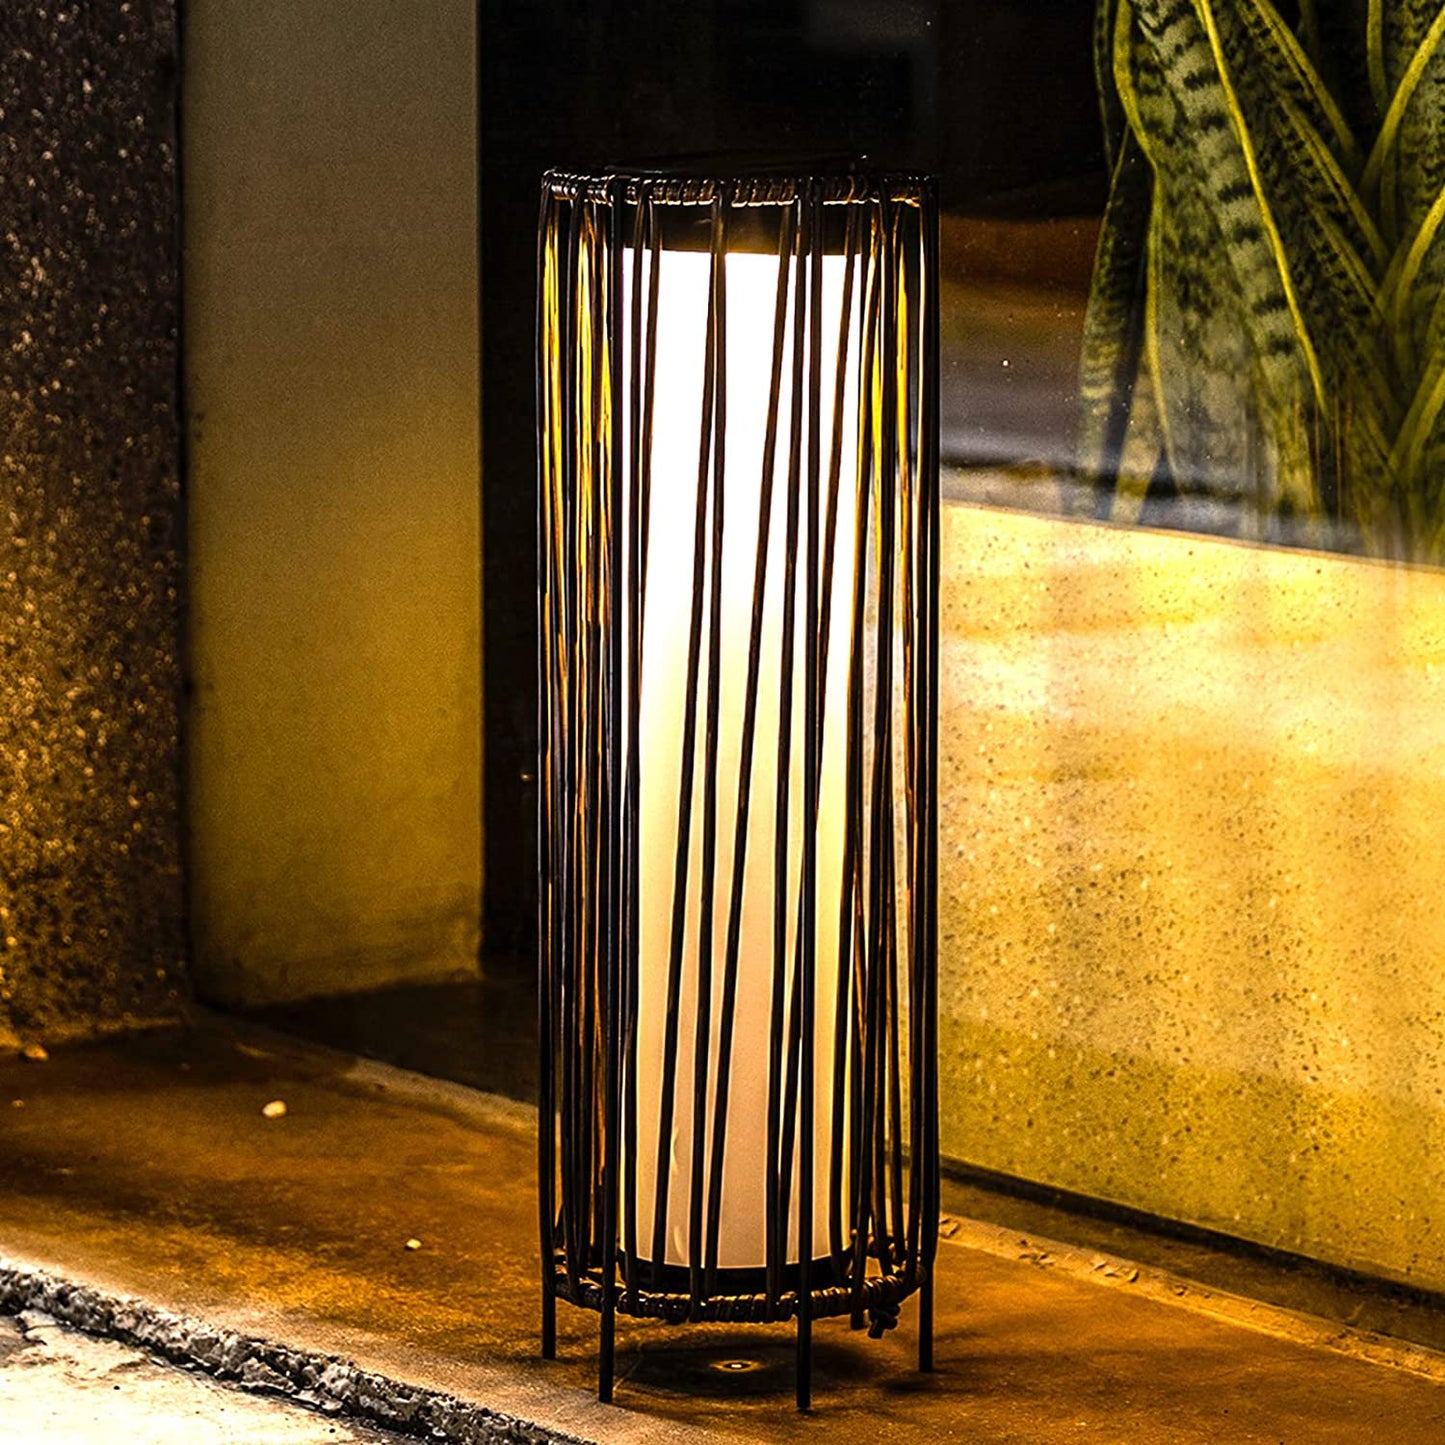 Floor Lamp, Ourdoor Lamps for Patio Waterproof, Rattan Lanterns Solar Garden Decoration Powered Lights for Outside Deck, Front Porch Decor